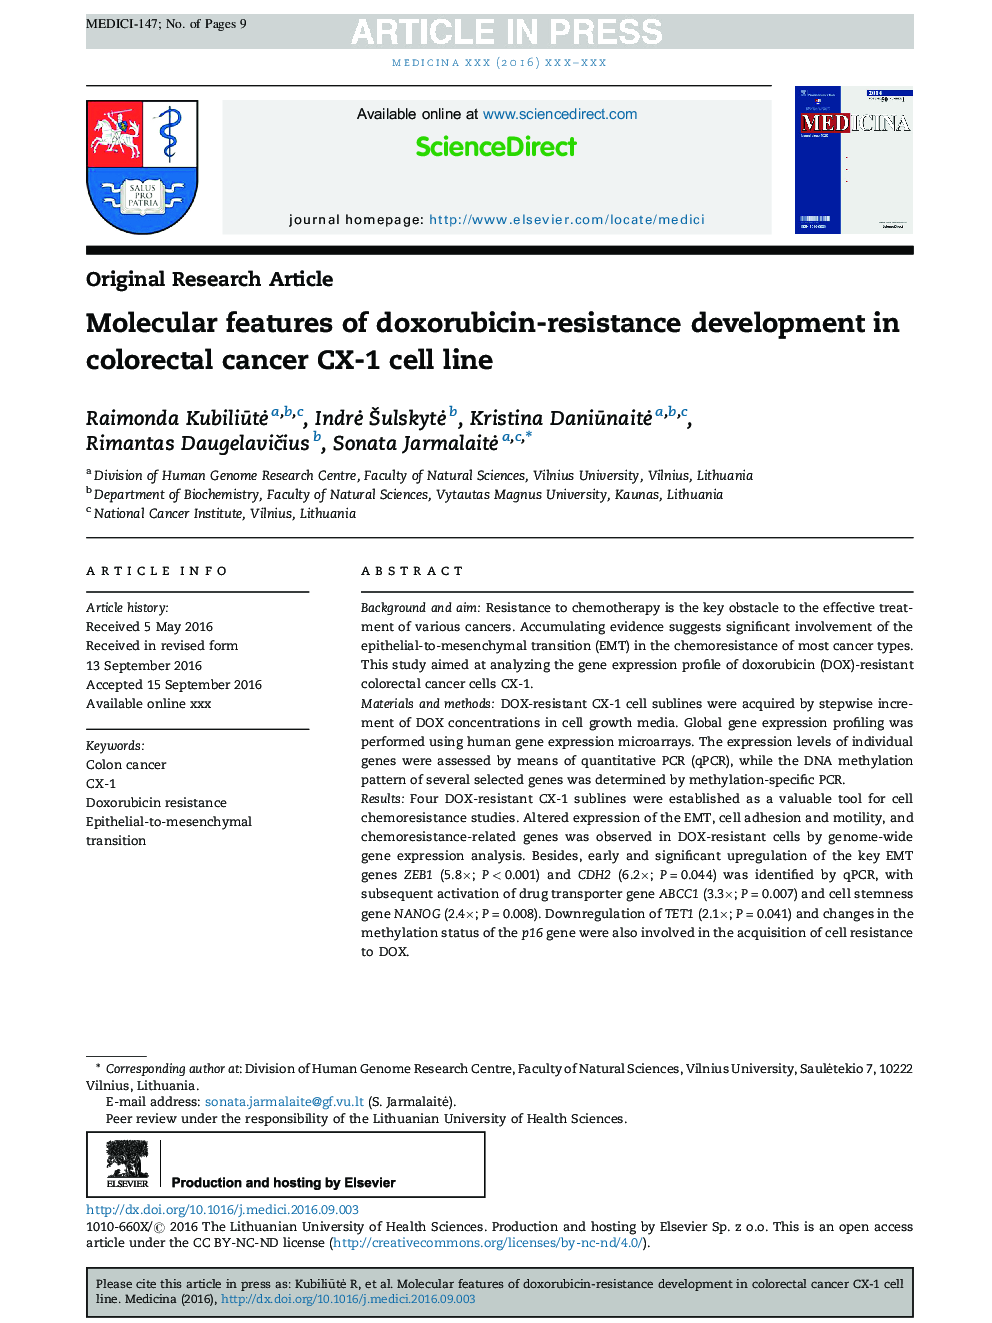 Molecular features of doxorubicin-resistance development in colorectal cancer CX-1 cell line